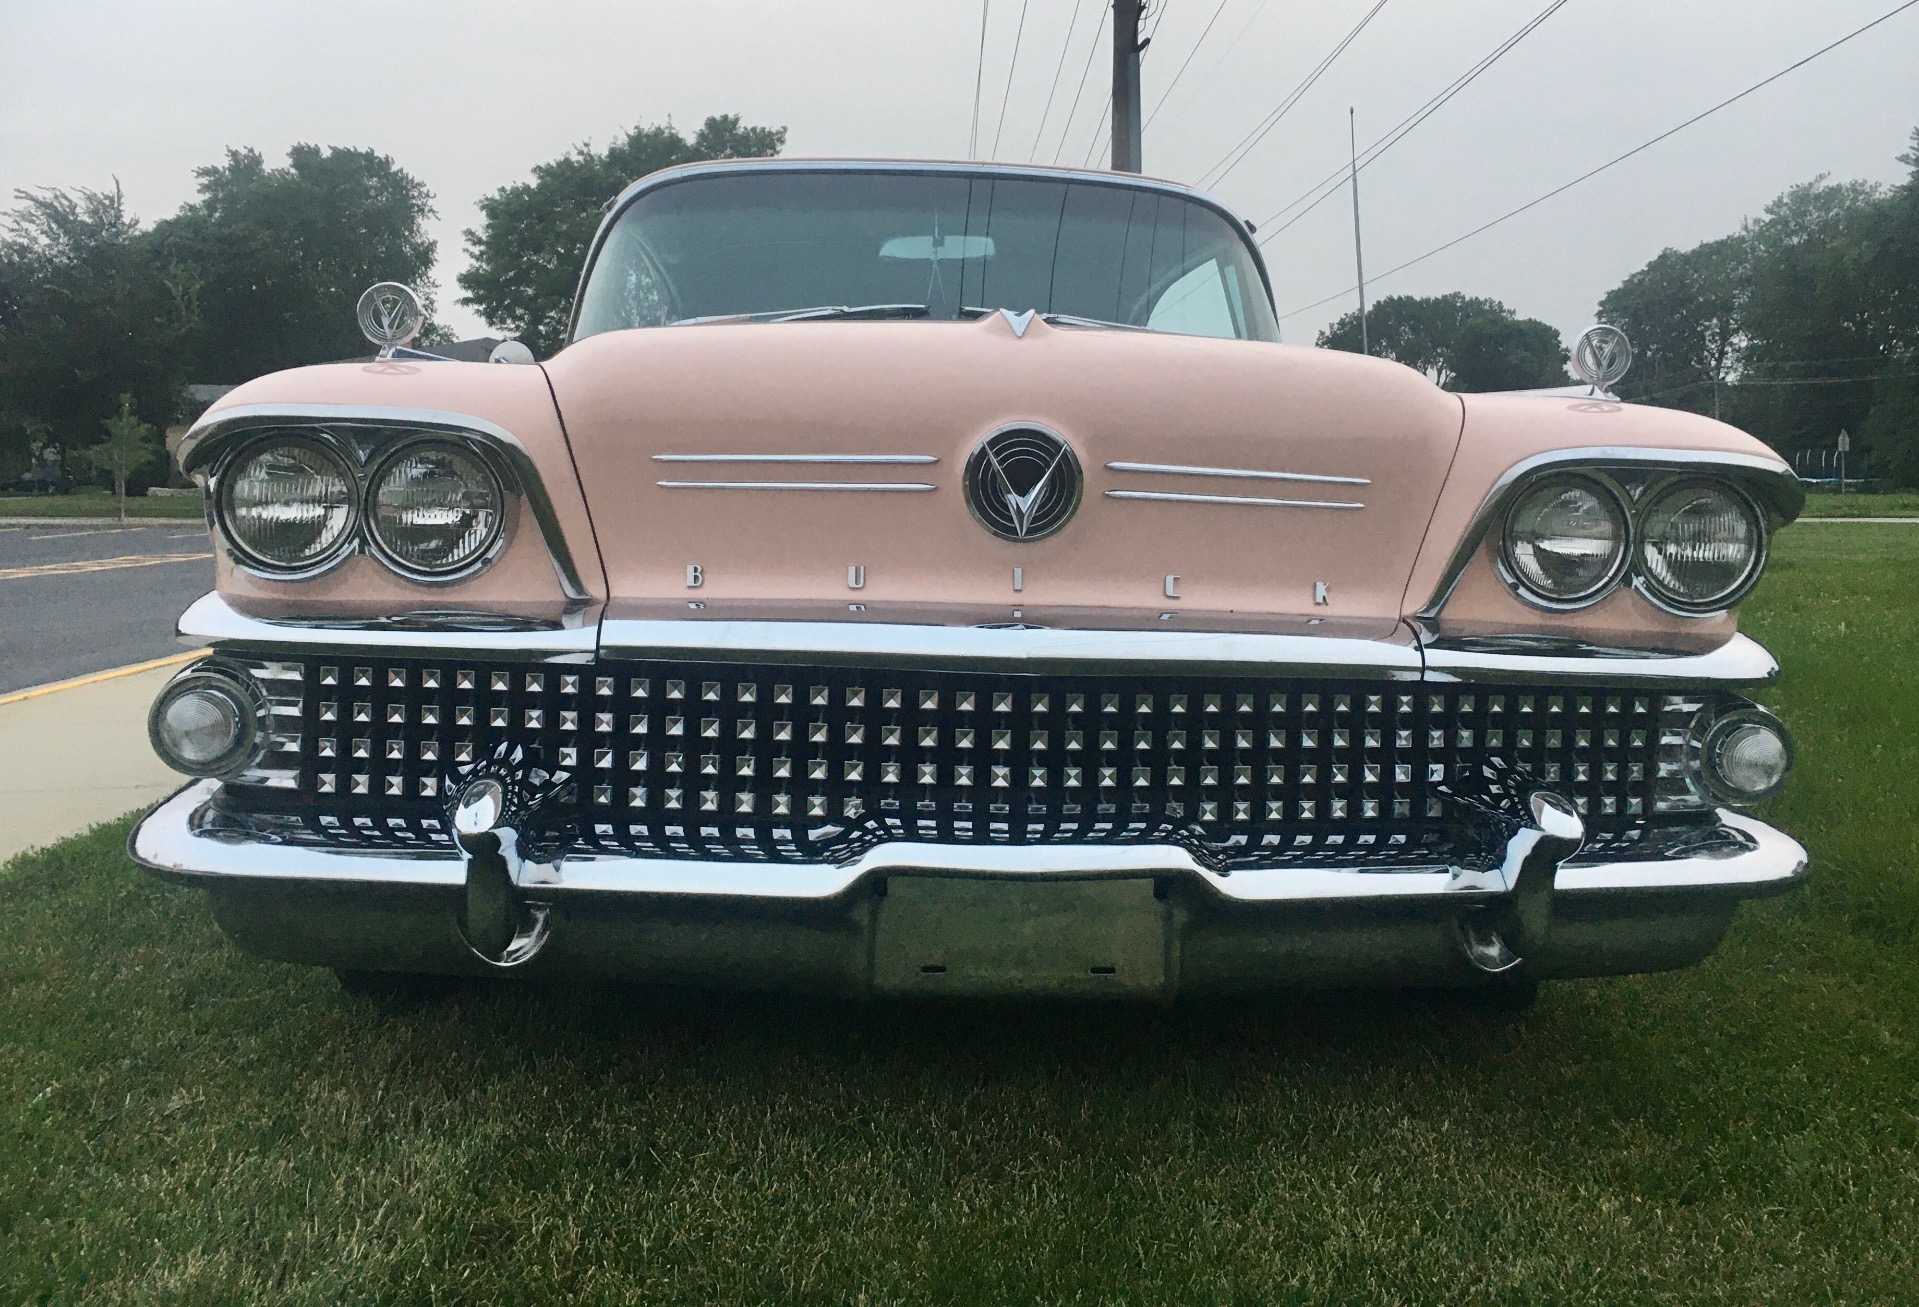 Used 1958 Buick Roadmaster Great Driving Classic | Mundelein, IL